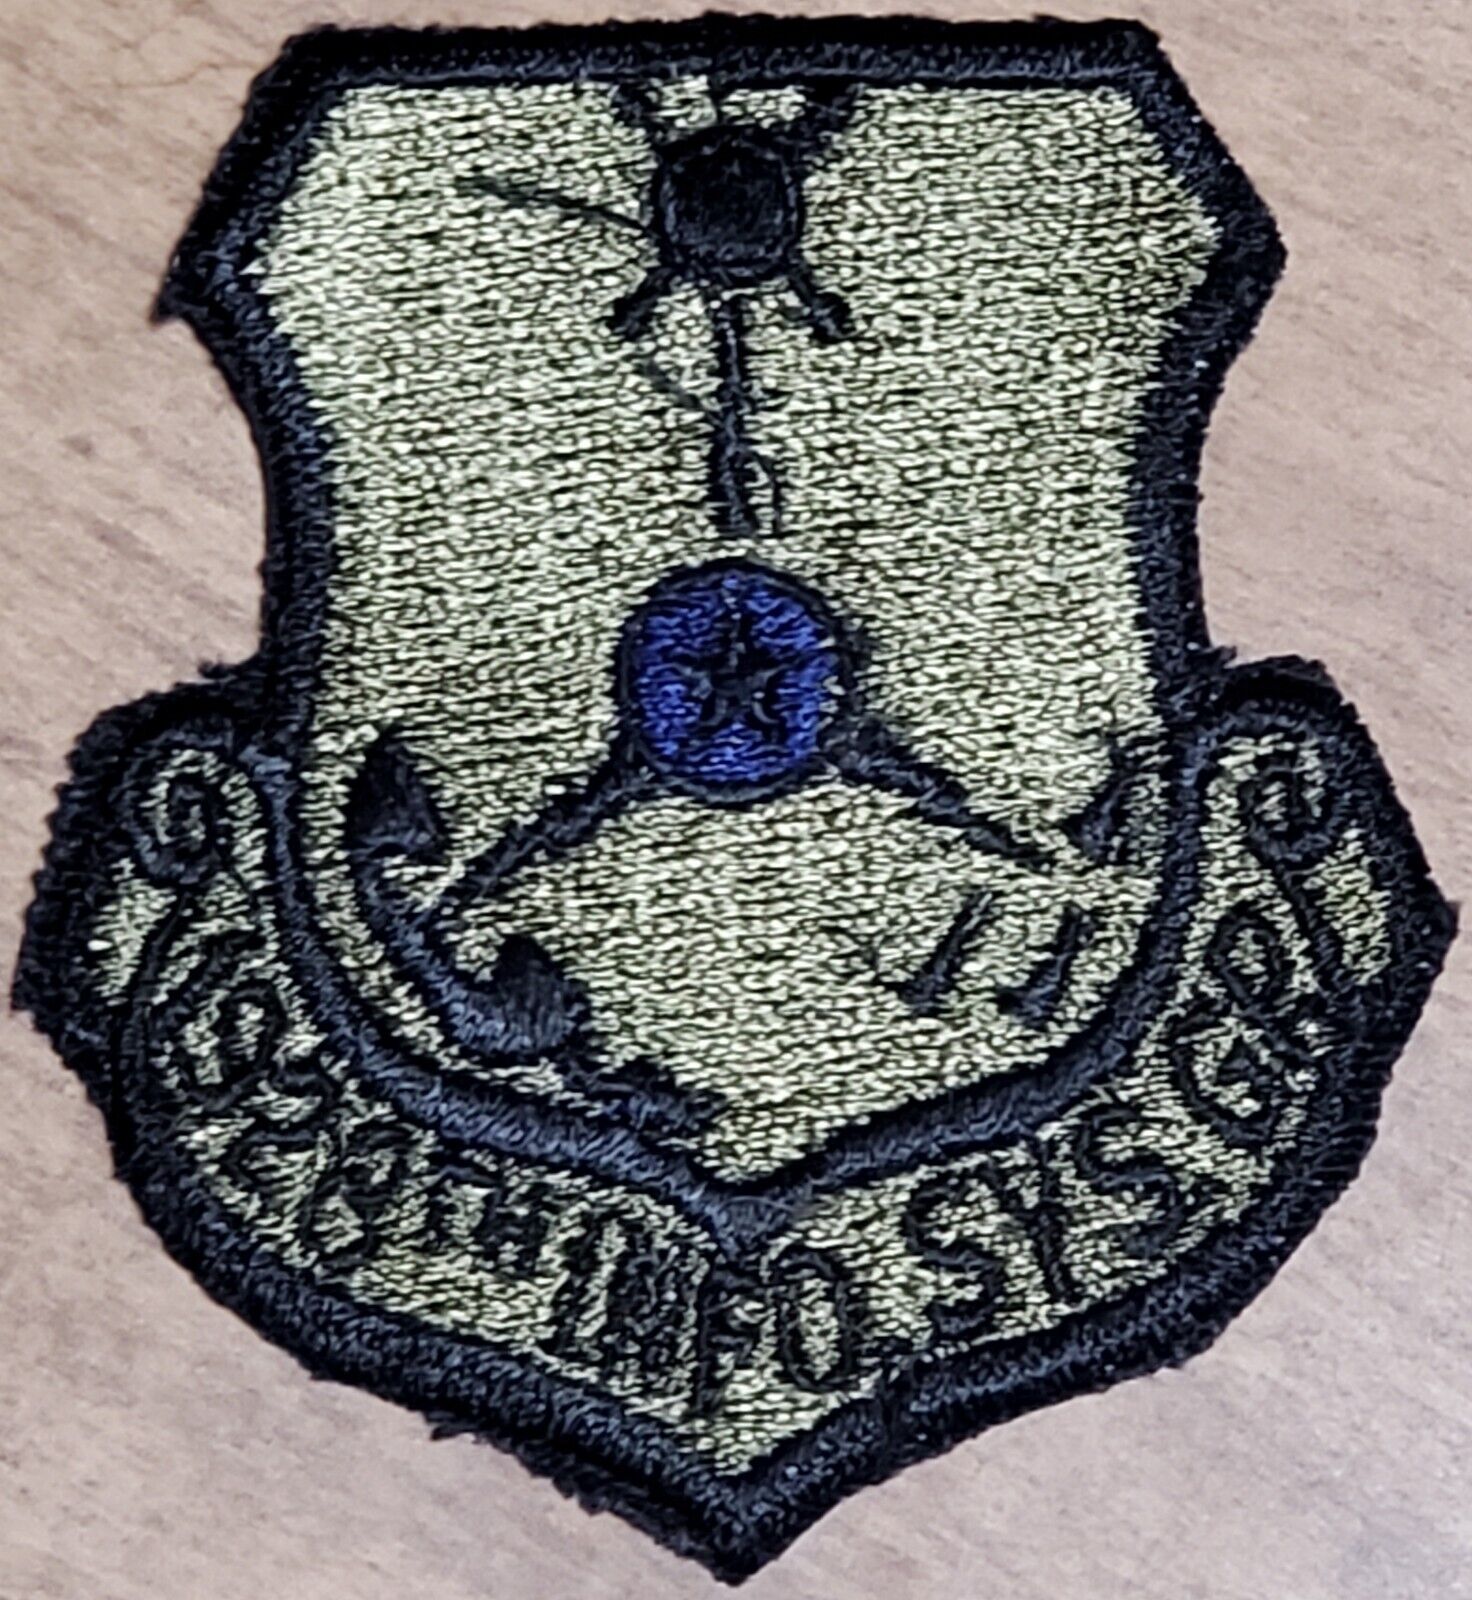 USAF 1928th INFORMATION SYSTEMS GROUP MILITARY PATCH SUBDUED OD GREEN VTG ORG